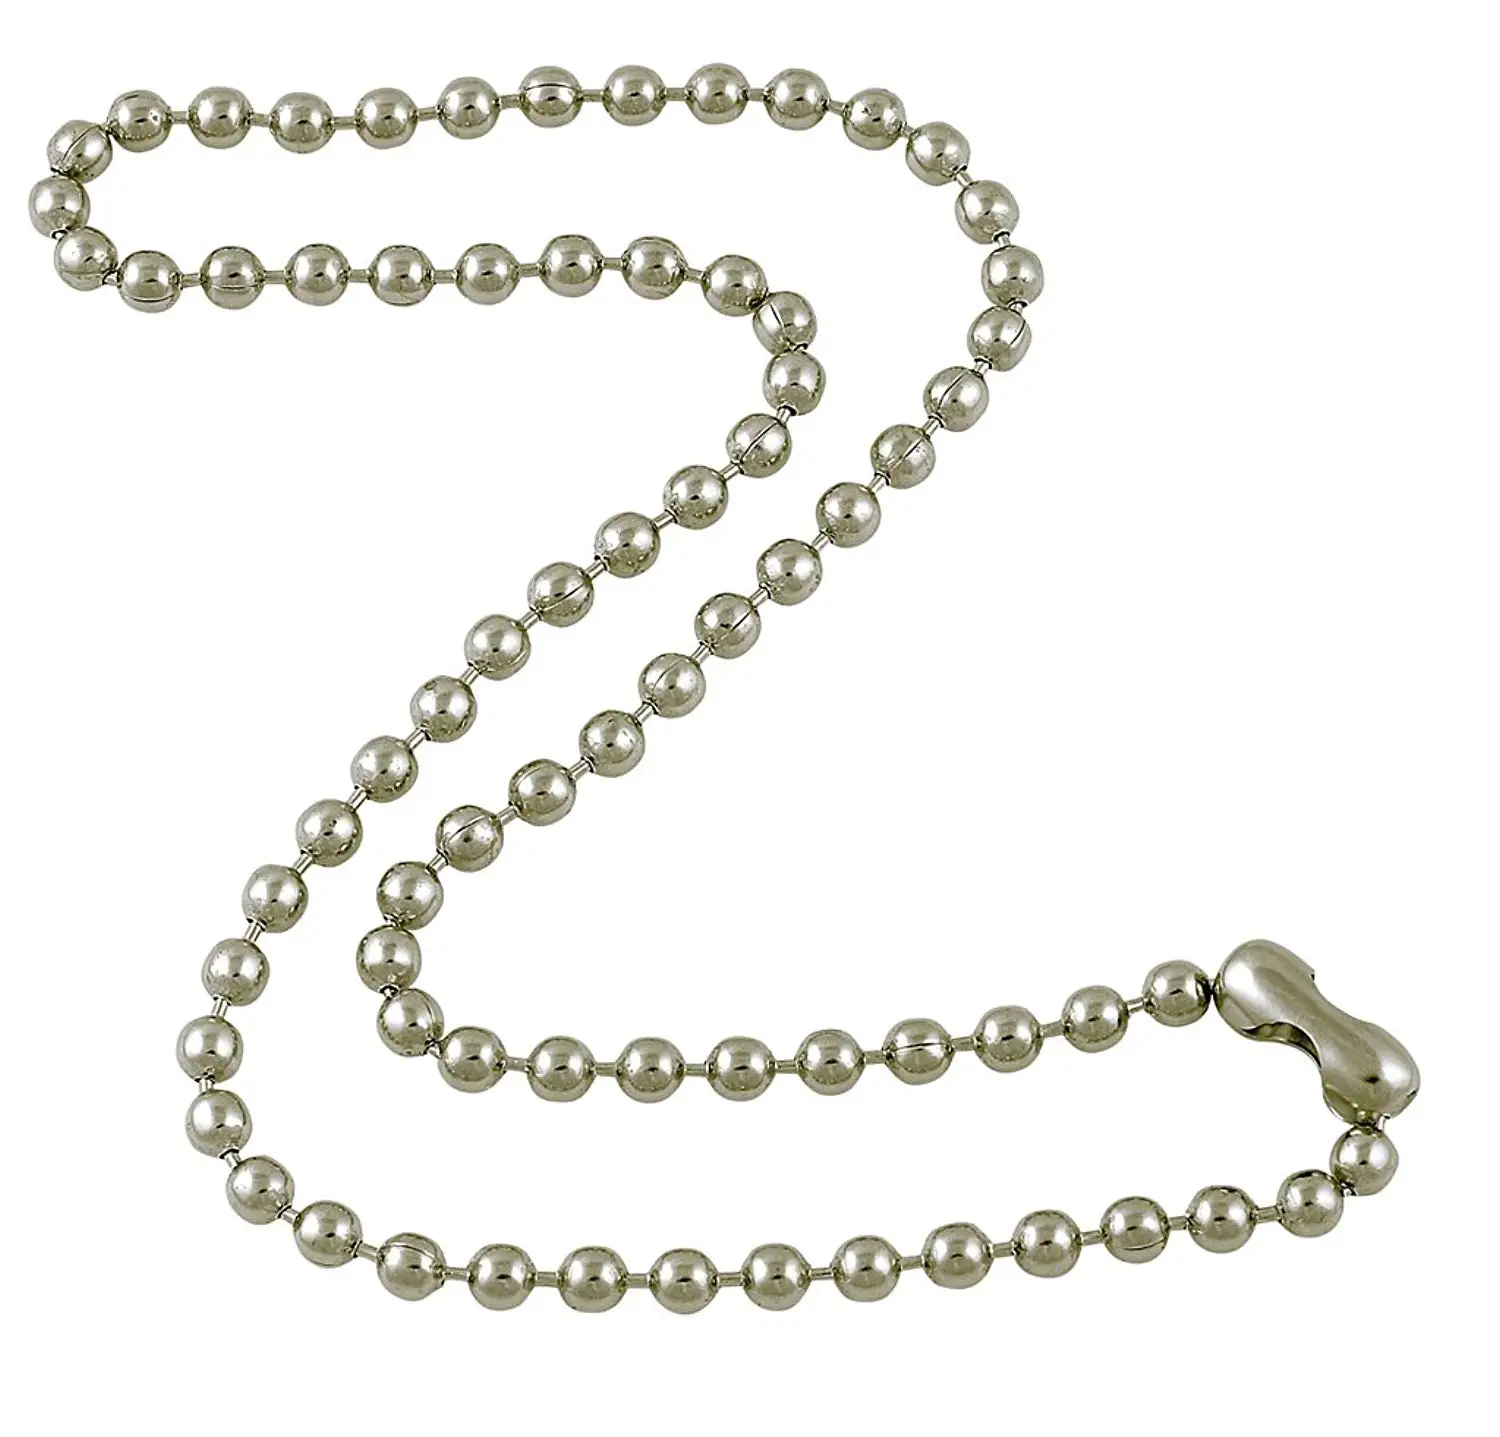 Cheap 8 Ball Chain, find 8 Ball Chain deals on line at Alibaba.com